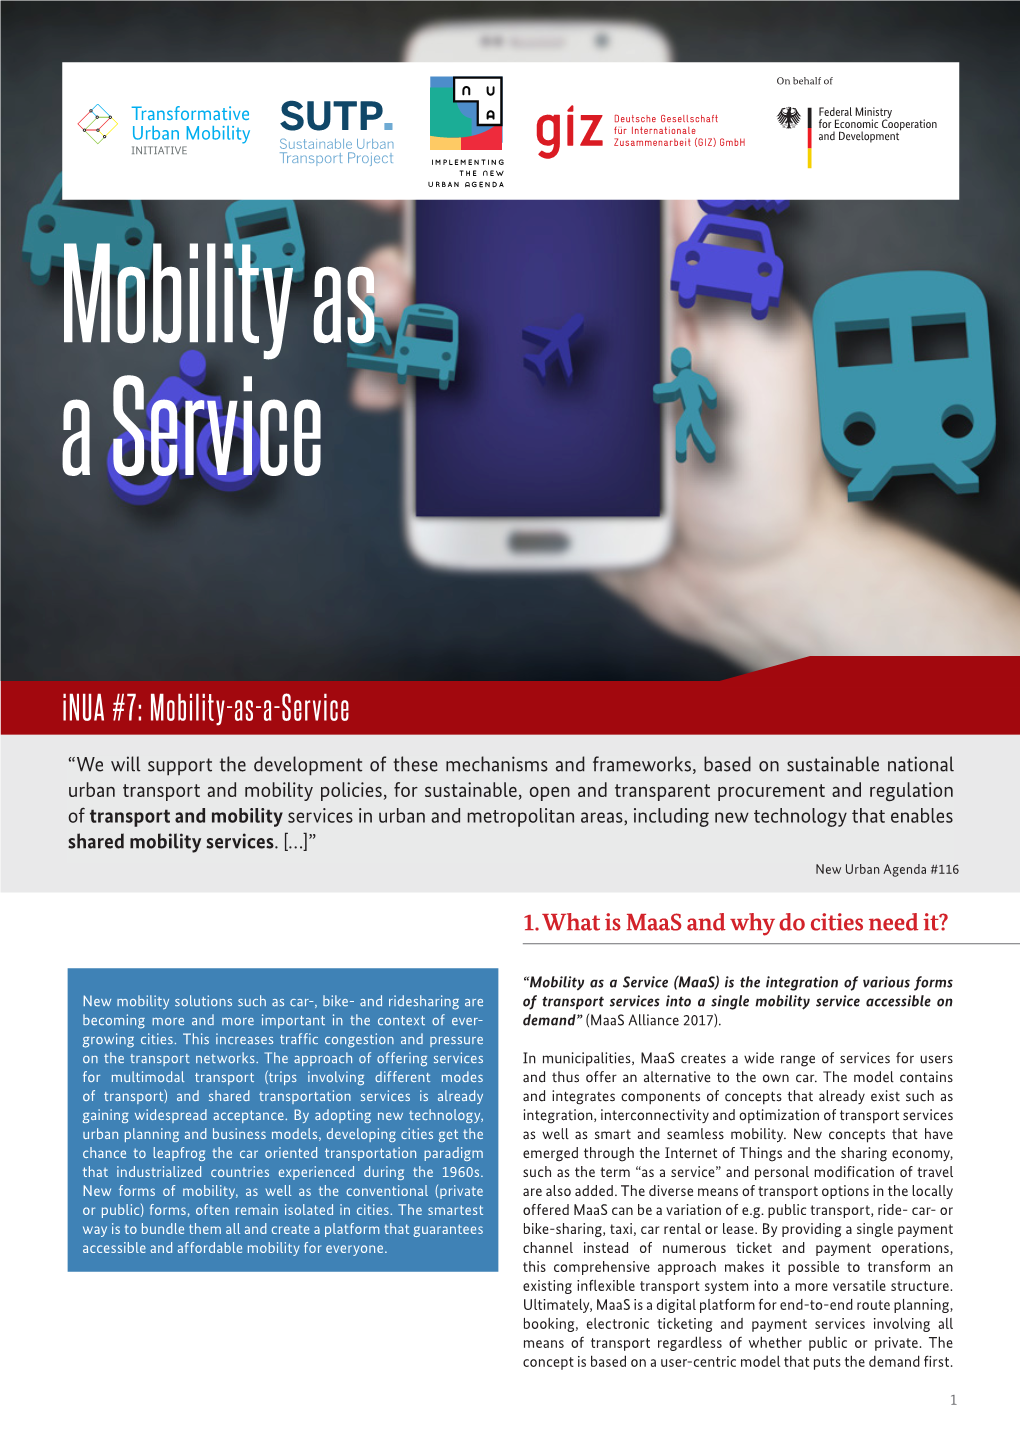 Inua #7: Mobility-As-A-Service